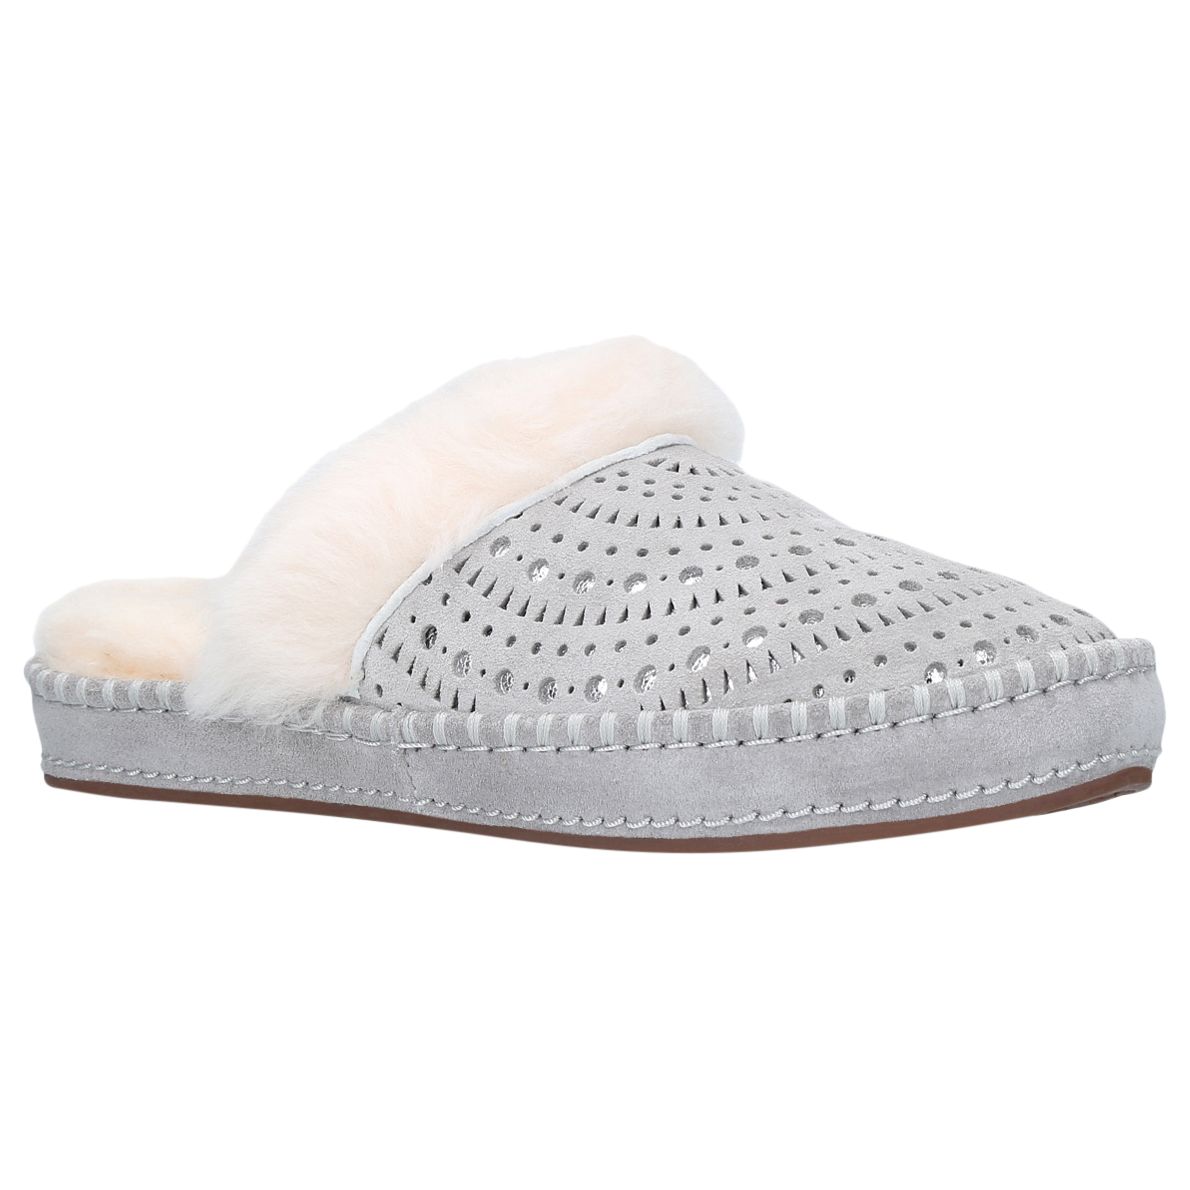 ugg aira slippers size 8